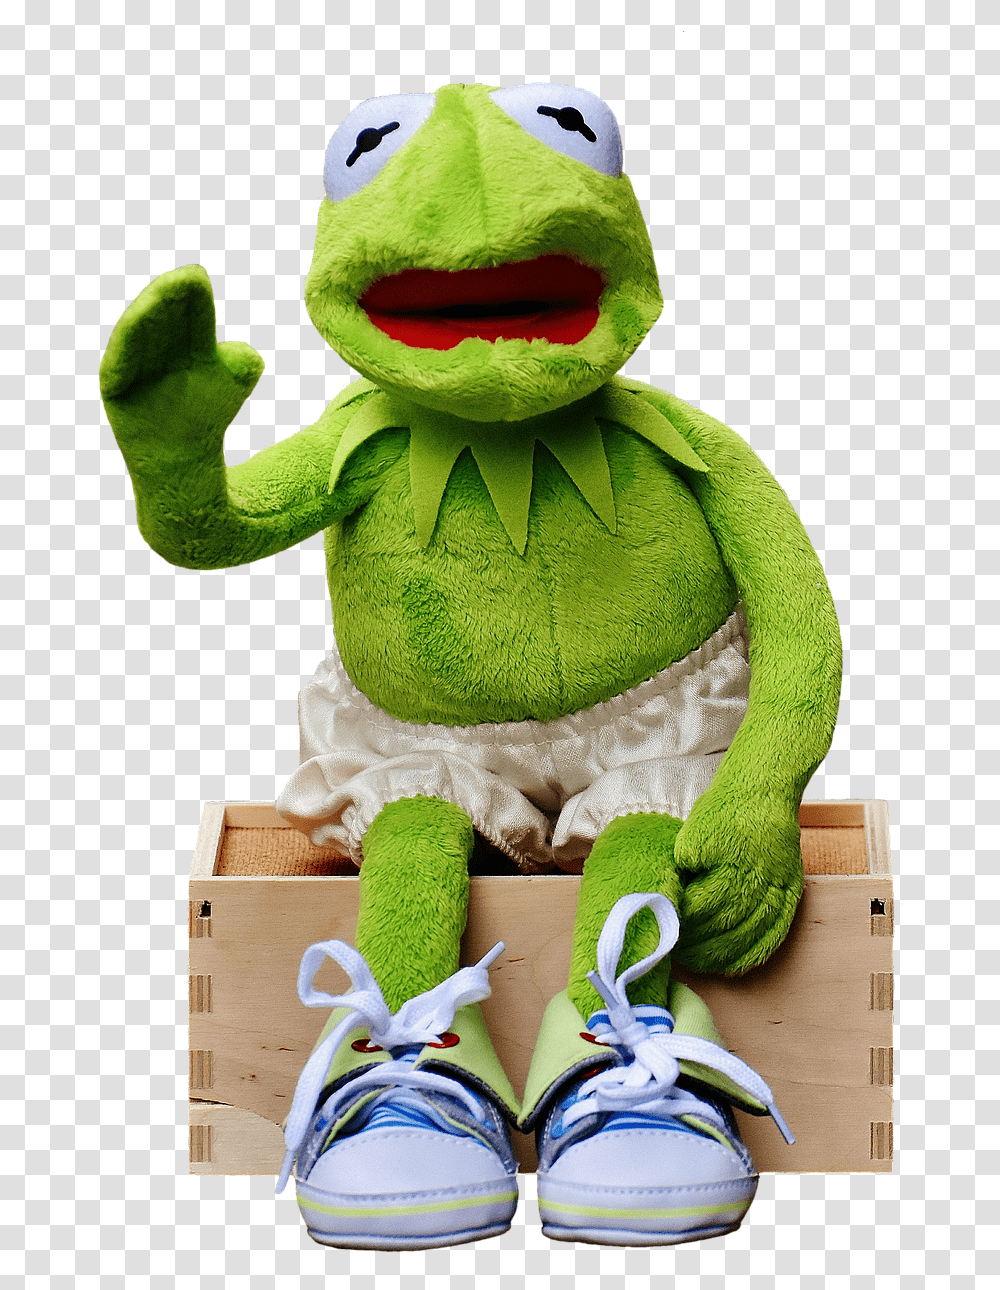 Kermit Sit Bank Sneakers Pants Frog Funny Wave Dienstag Spruch, Toy, Apparel, Plush Transparent Png